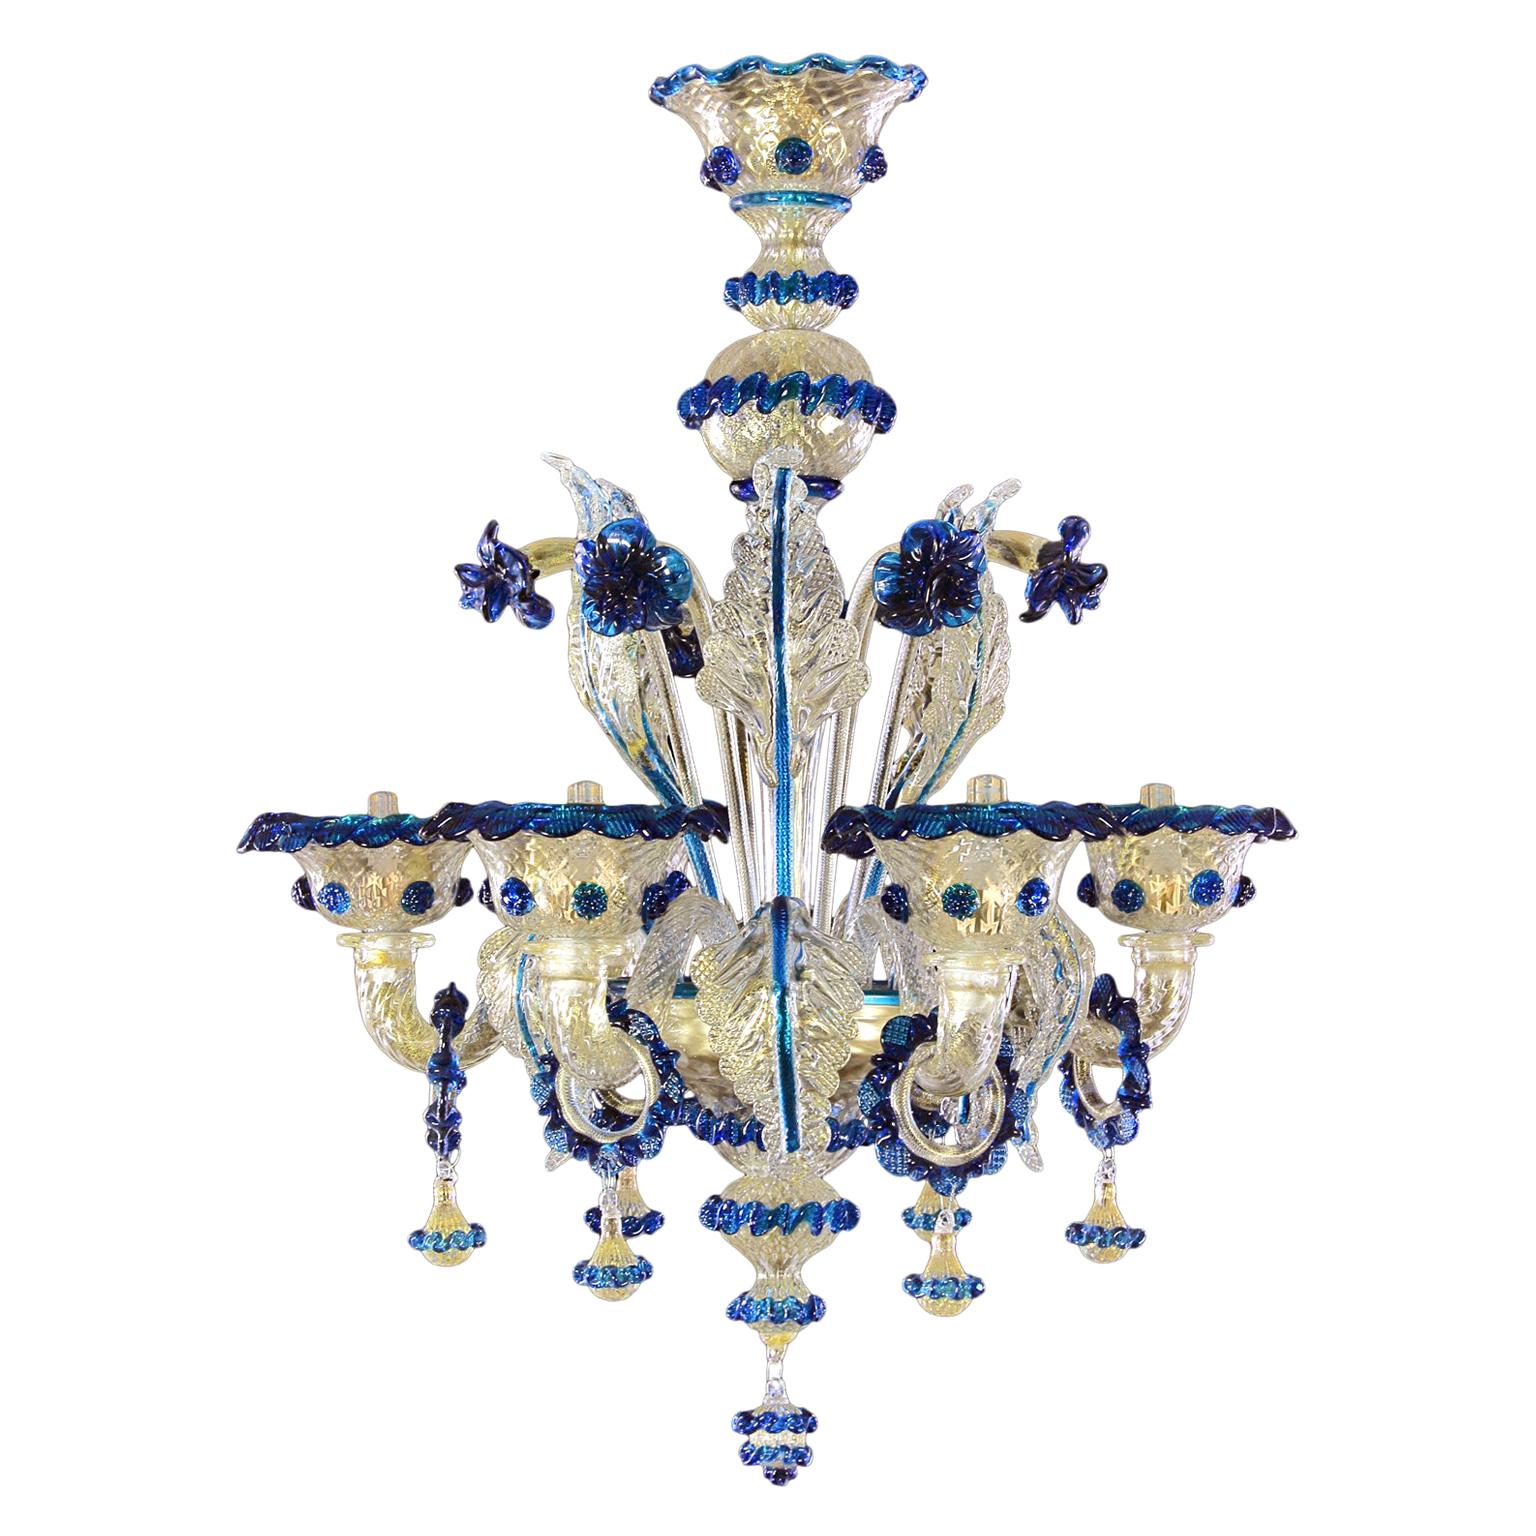 Artistic Rich Chandelier, 6 Arms Gold Murano Glass Blue Details by Multiforme For Sale